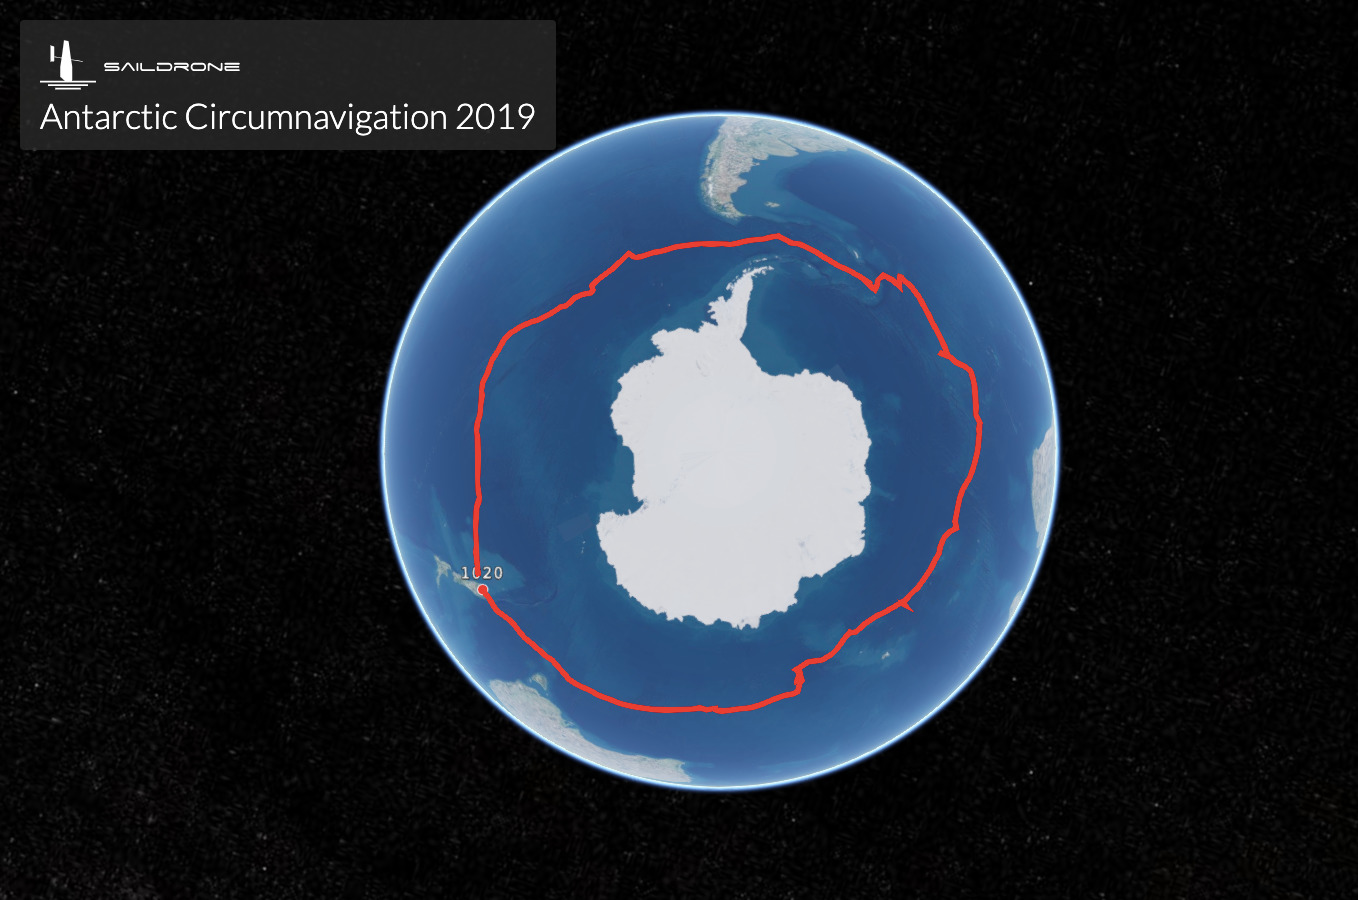 On August 3, 2019, an unmanned Saildrone 1020 completed a 13,670-mile journey around Antarctica in search of carbon dioxide. It was world’s first autonomous circumnavigation of Antarctica. Learn more about Saildrone 1020's journey at https://www.saildrone.com/antarctica.